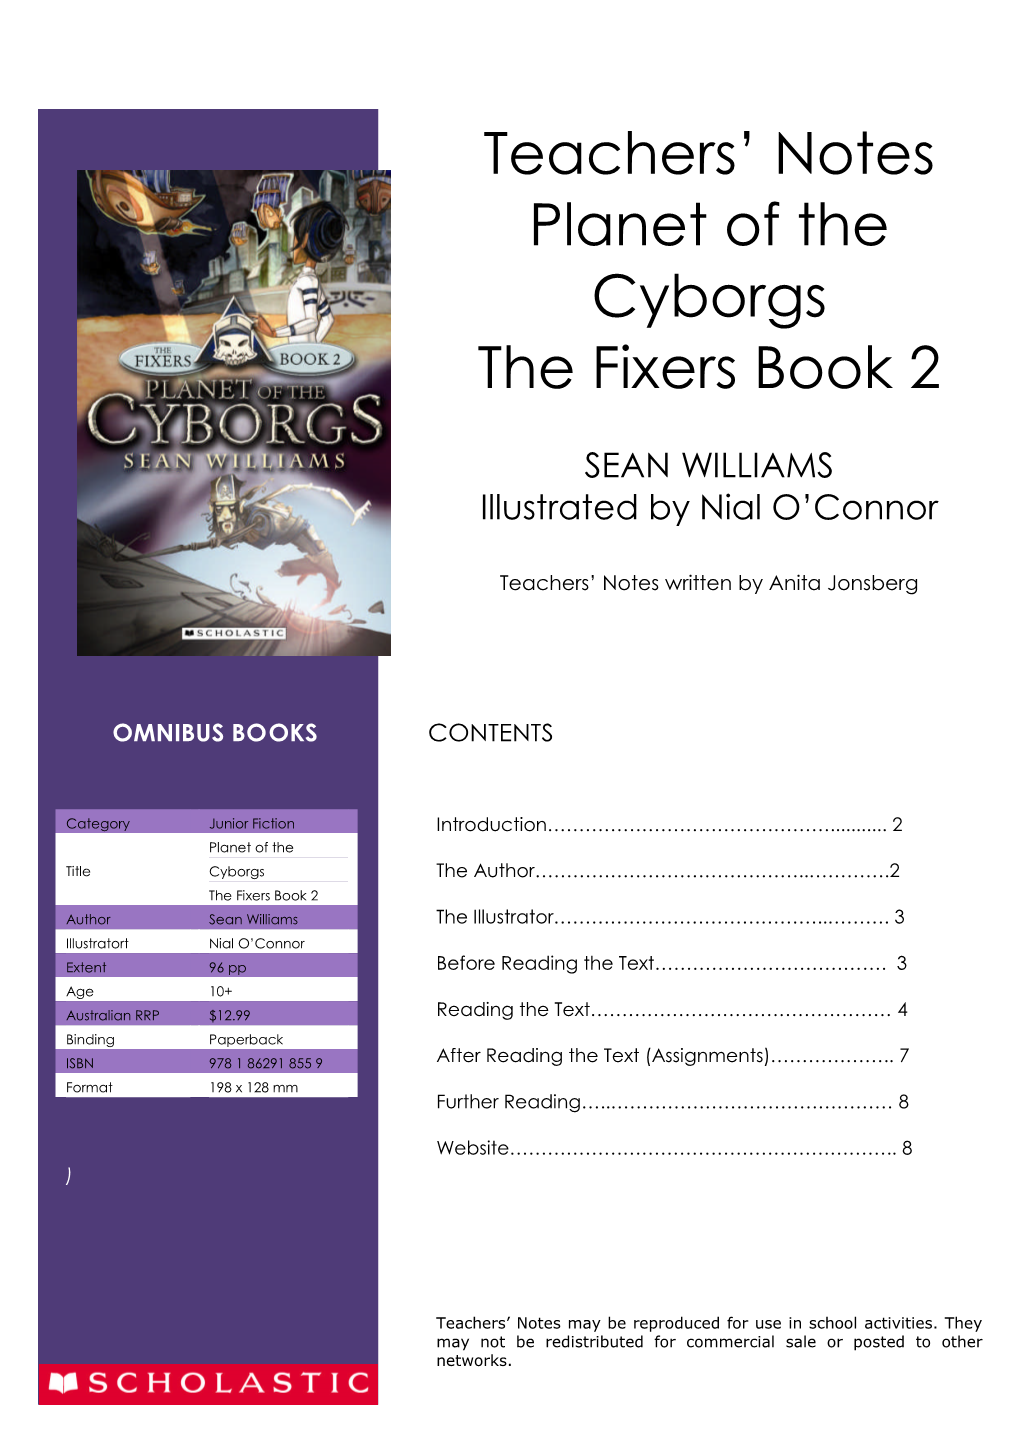 Teachers' Notes Planet of the Cyborgs the Fixers Book 2